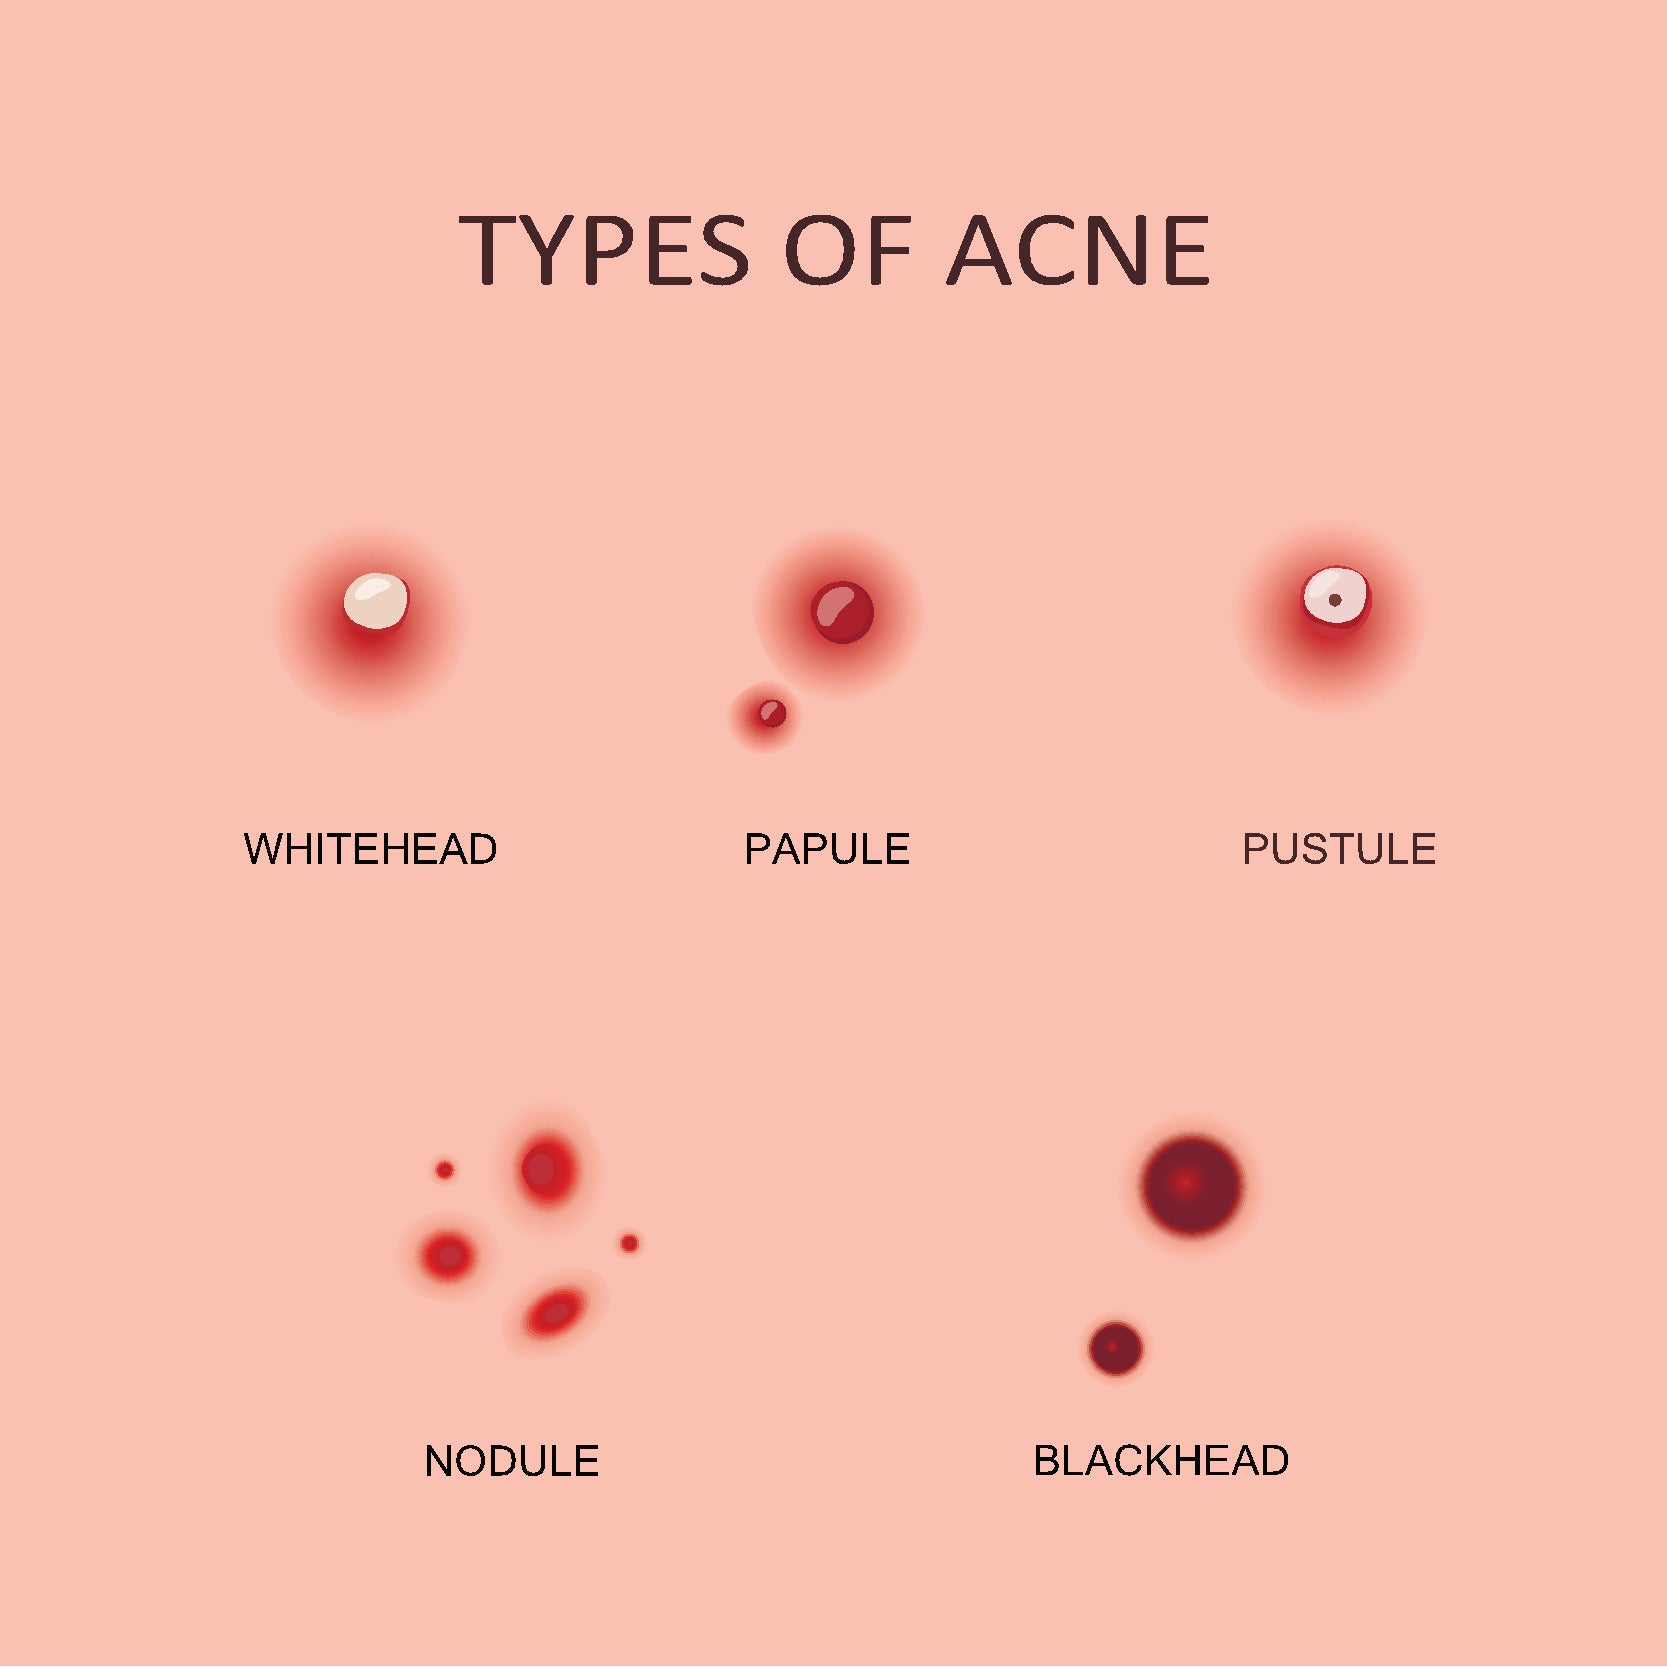 Acne Scars: What Causes Them and How to Treat Them